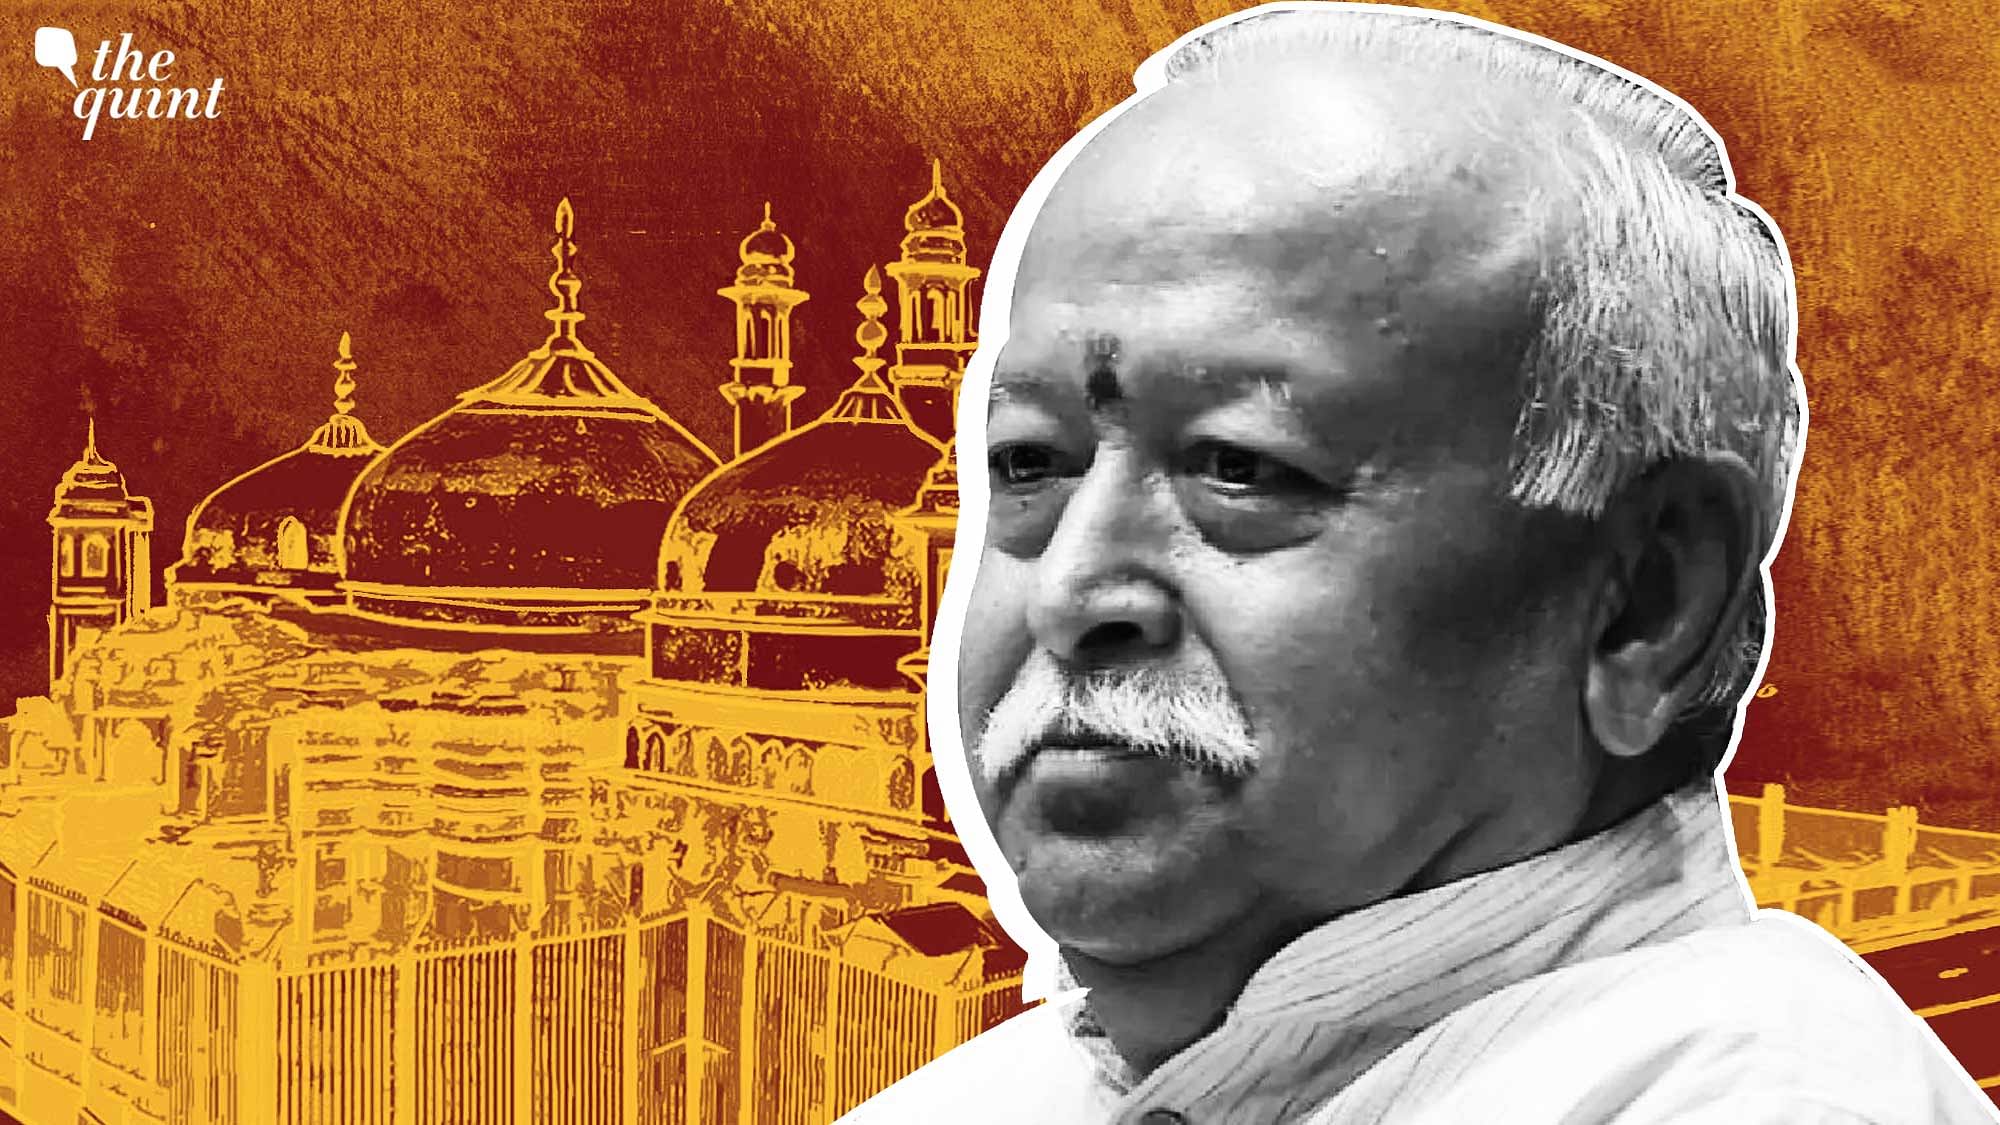 <div class="paragraphs"><p>(RSS chief Mohan Bhagwat spoke extensively on the Gyanvapi Mosque issue)</p></div>